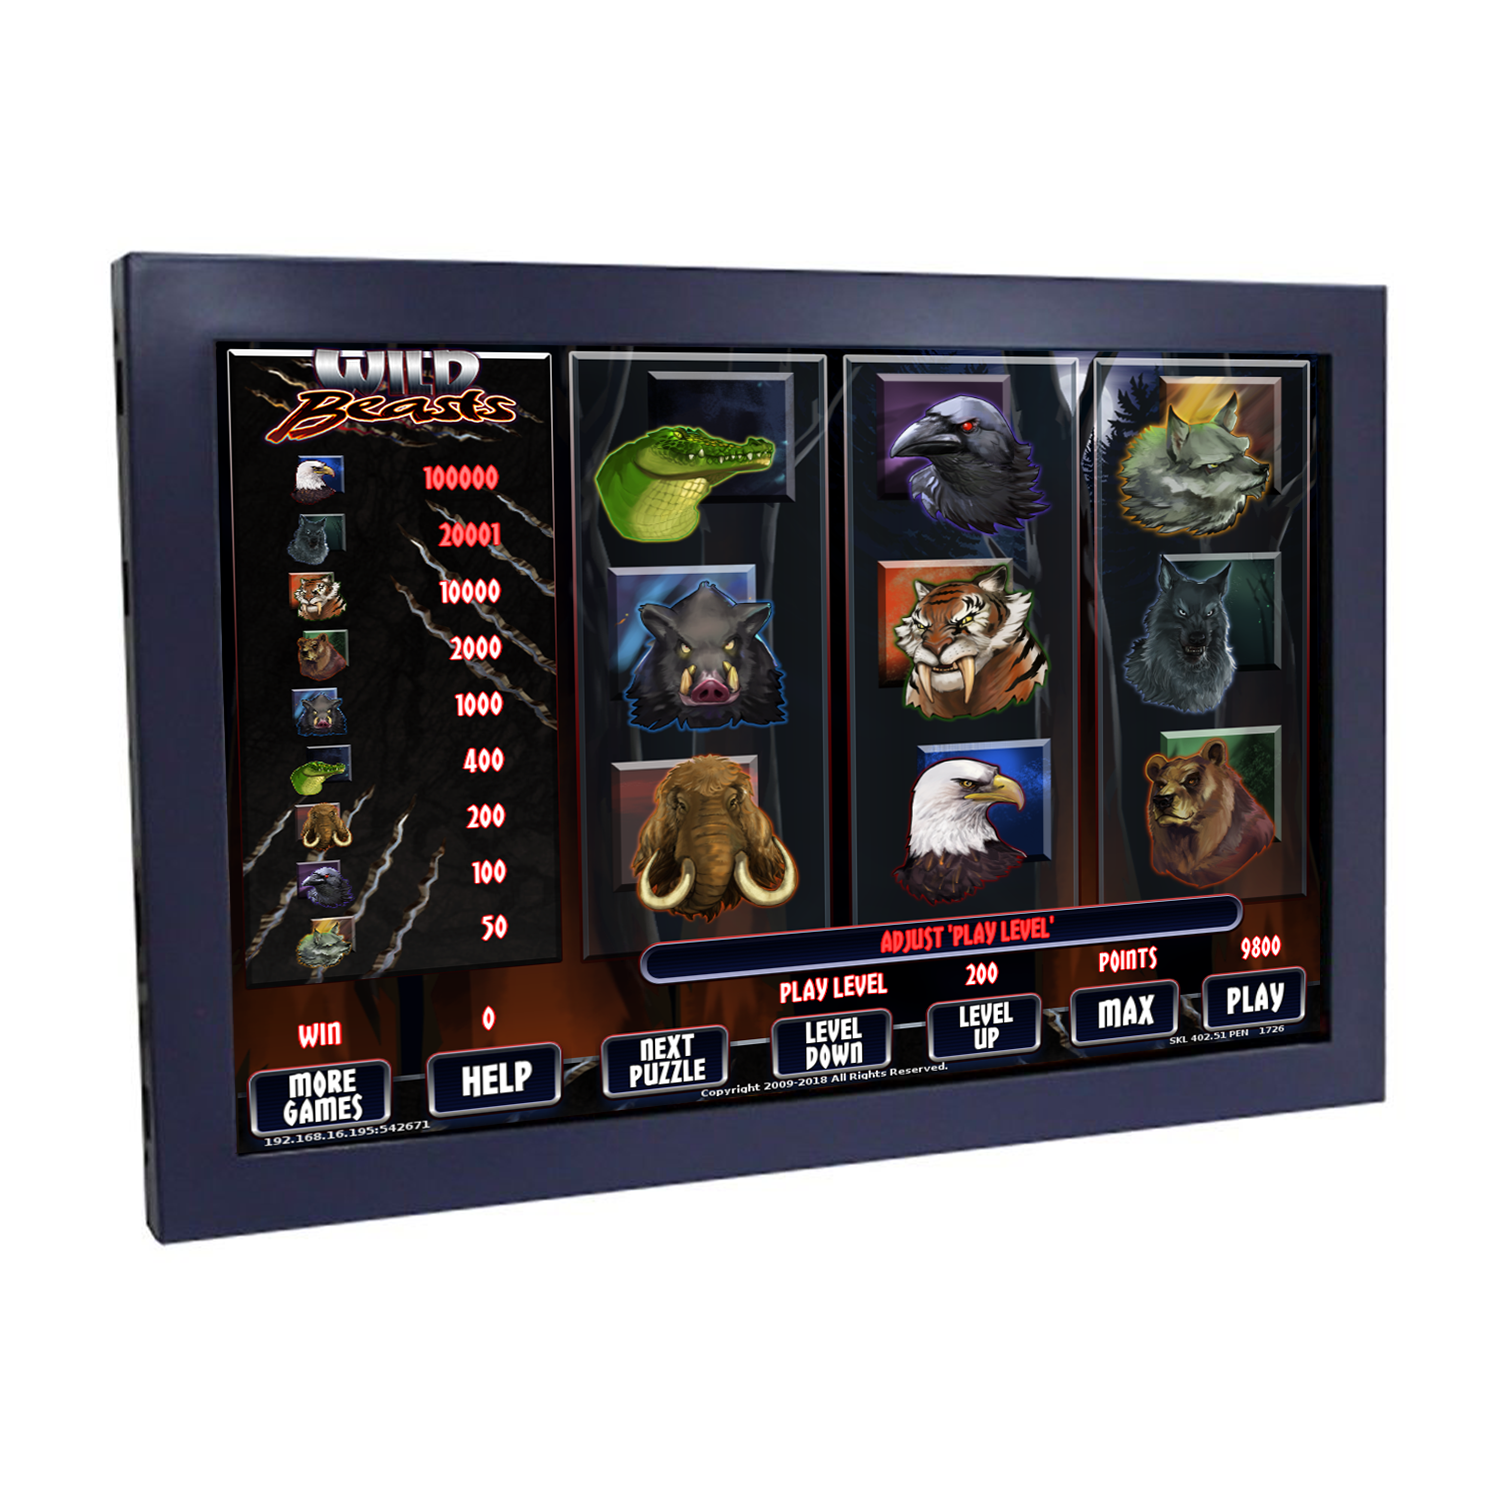 22” Goldfinger LCD Touchscreen Monitor: Pennsylvania Skill Centurion, Spartan, and Ranger  22" LCD Touchscreen Monitor LED Display Serial & USB Touchscreen Connections Outer Bezel Dimensions: 23" W x 18 1/2" H LCD Inner Display Dimensions: 18 5/8" W x 11 5/8" H Black Steel Mounting Bezel Included See a Clear Picture from All Angles Displays Bright & Vibrant Colors Used with the Pennsylvania Skill Centurion, Spartan, and Ranger Cabinets